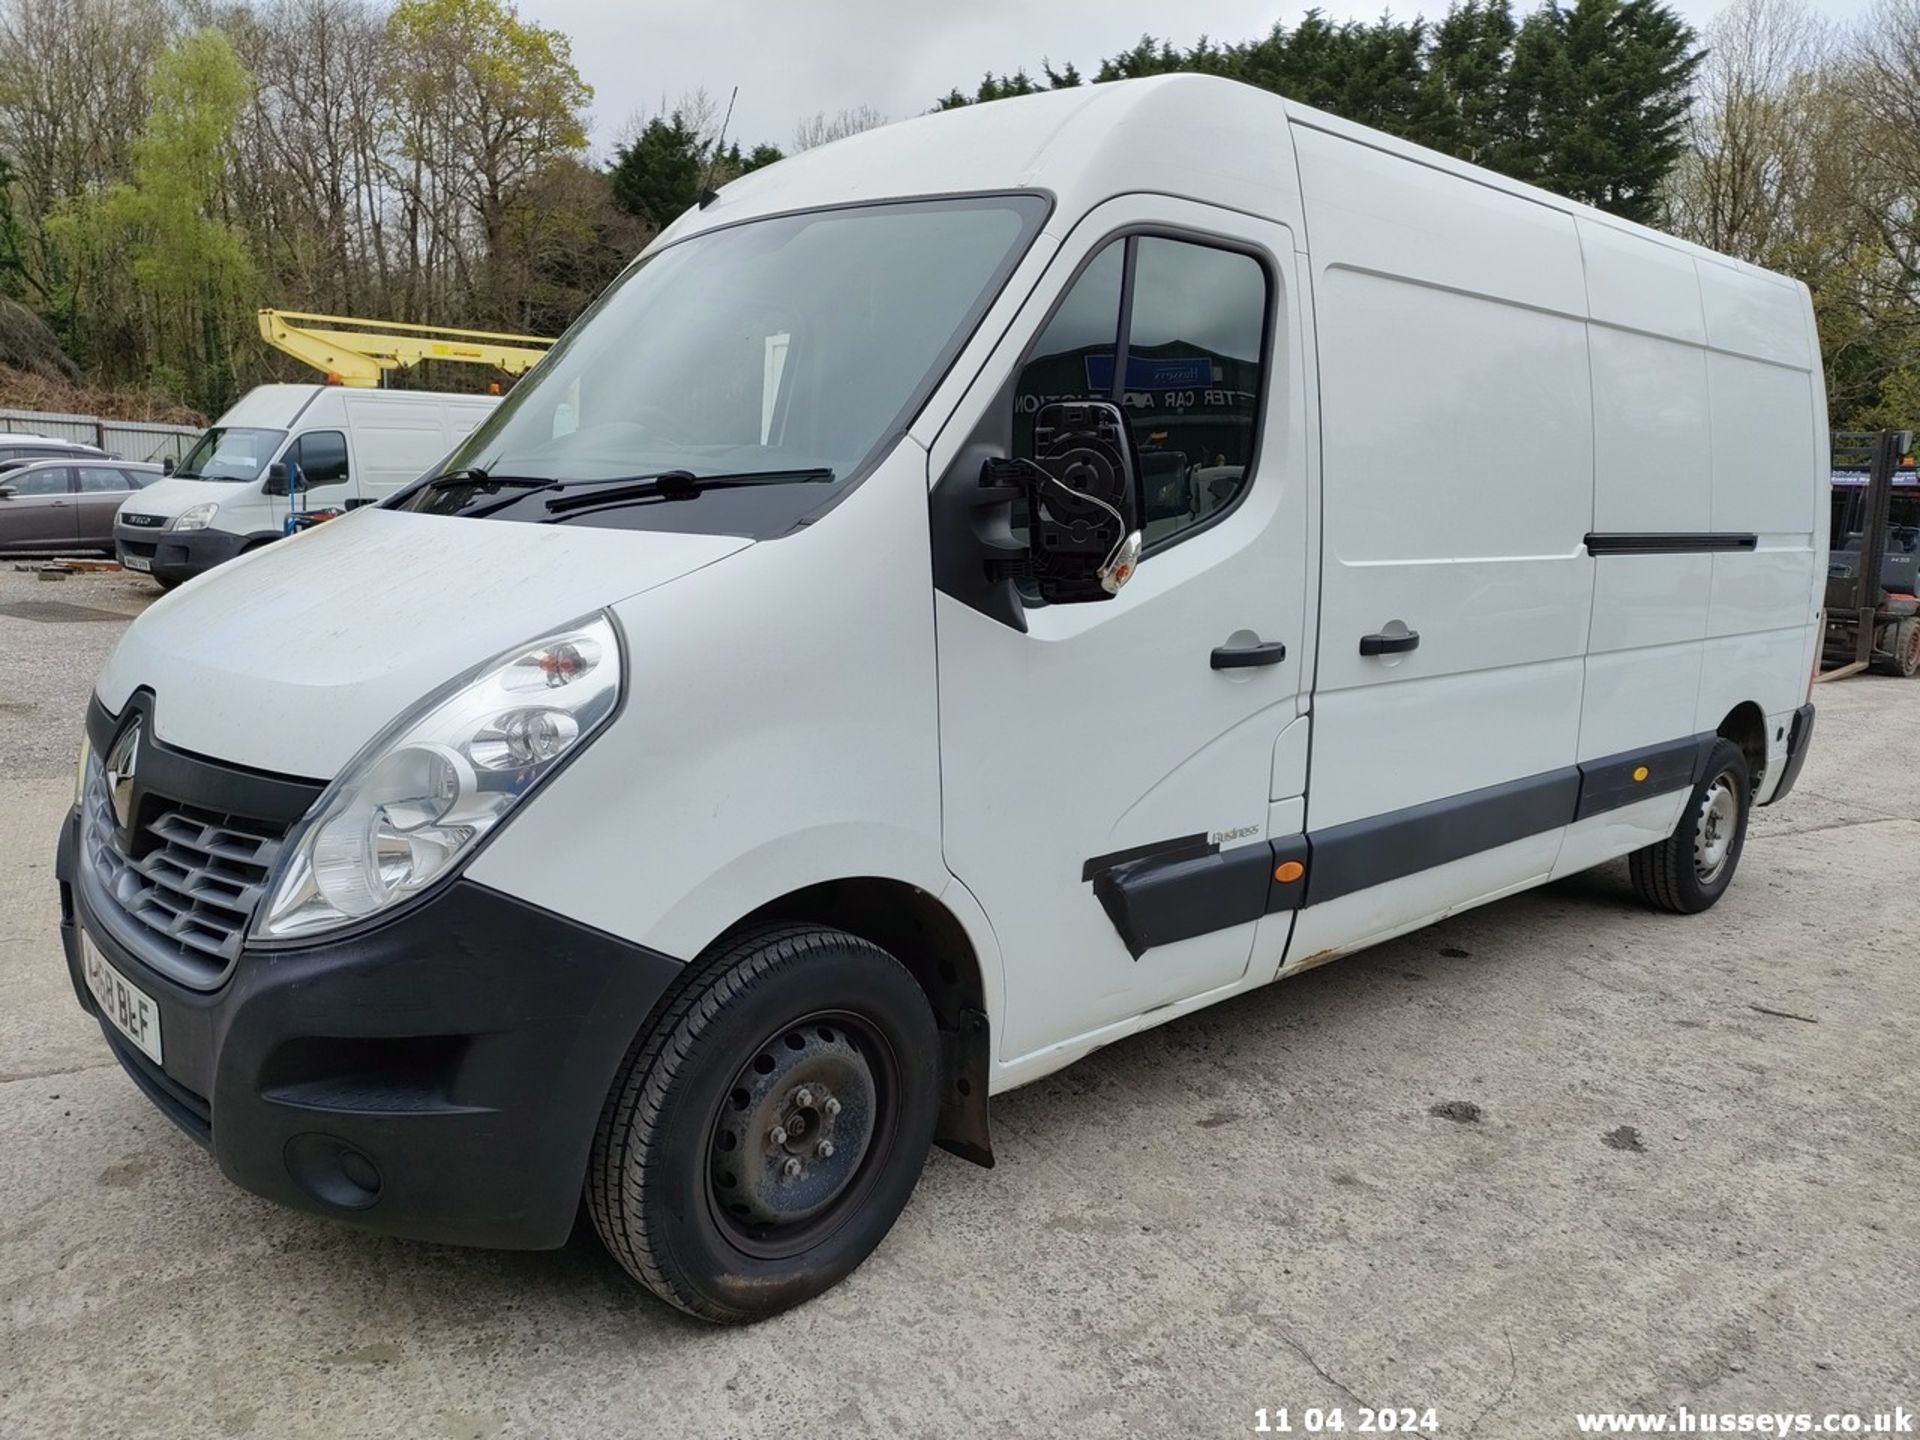 18/68 RENAULT MASTER LM35 BUSINESS DCI - 2298cc 5dr Van (White) - Image 17 of 68